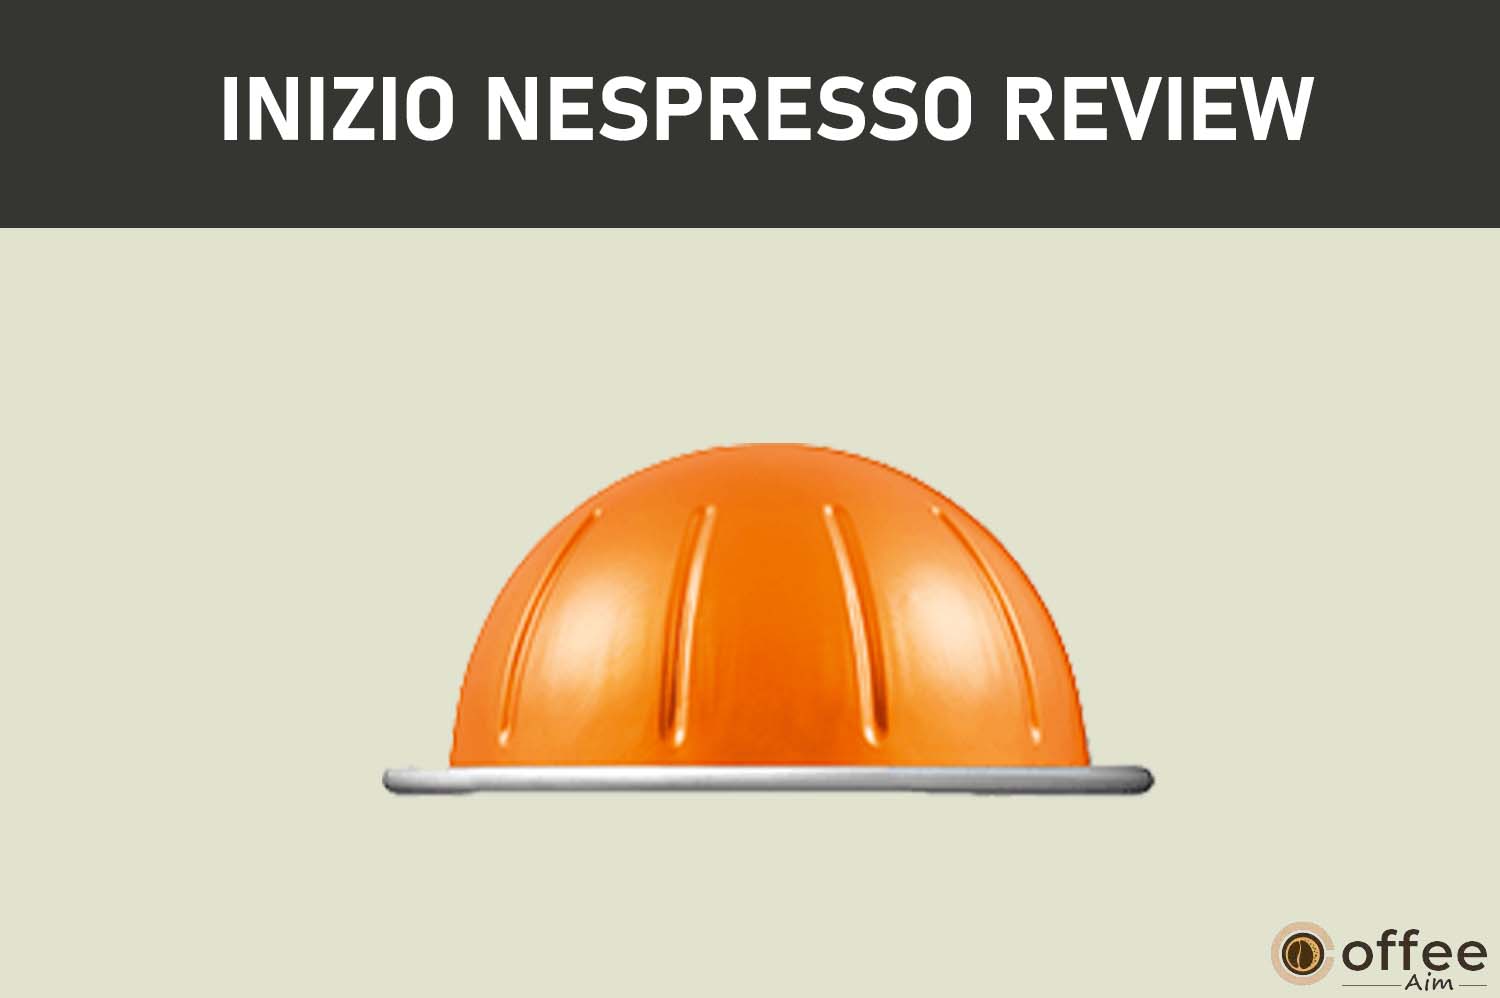 Featured image for the article "Inizio Nespresso Review"